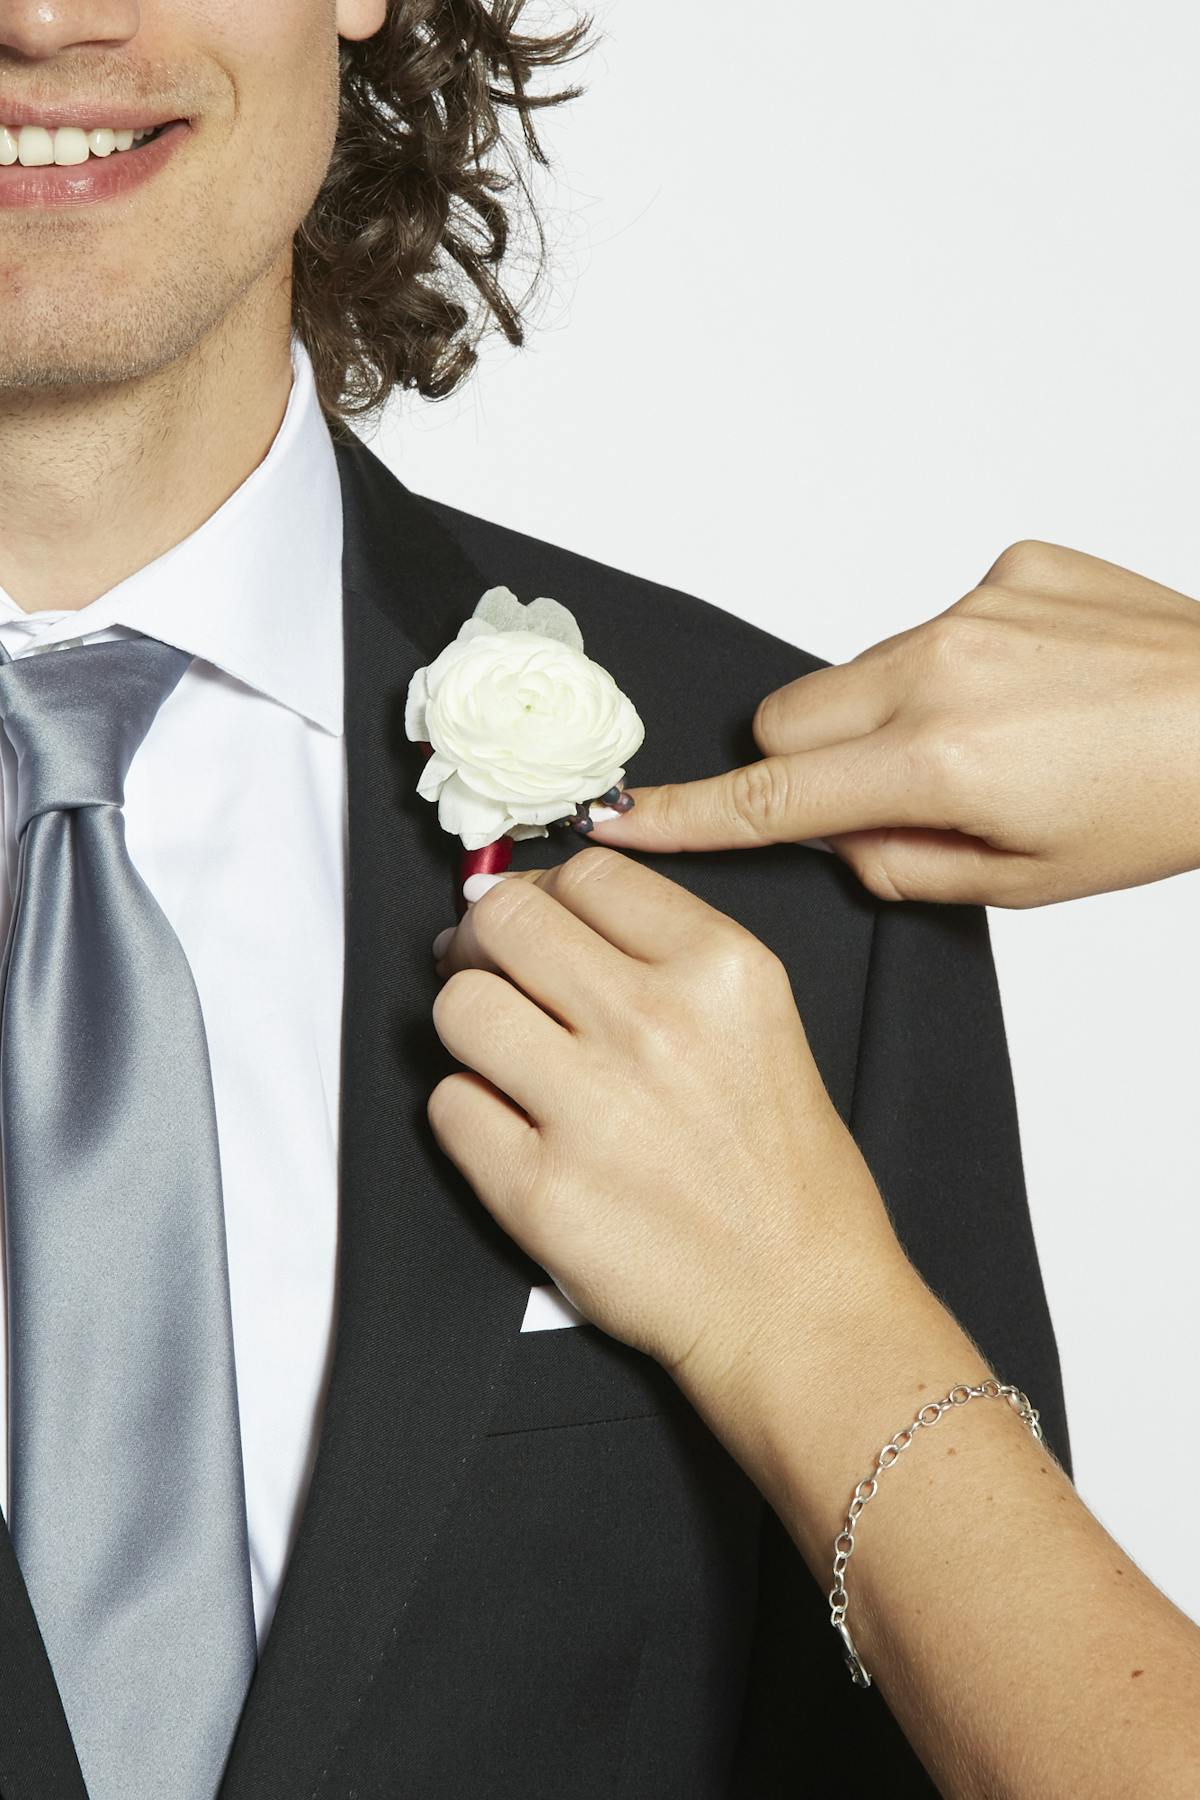 Positioning a white boutonniere on a black suit jacket to pin it in place.